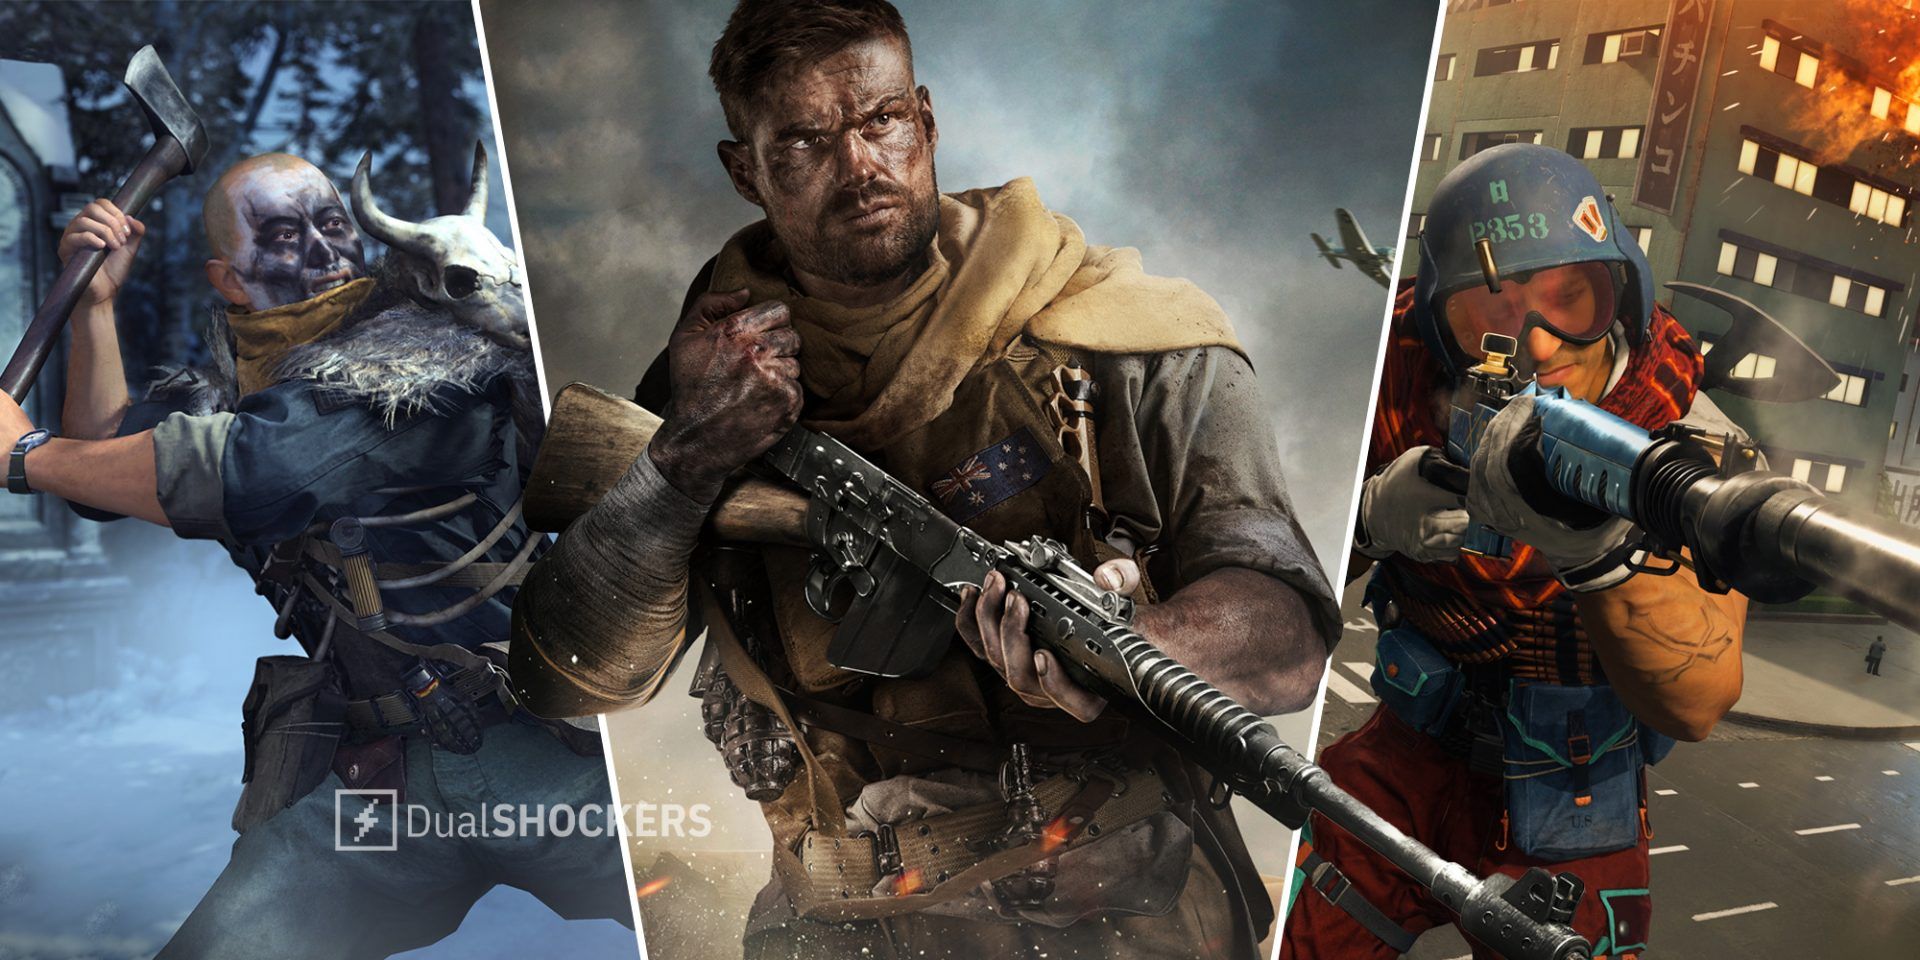 Call of Duty Vanguard player with axe swinging on left, Call of Duty Vanguard promo image in middle, player holding rifle and wearing armor on right